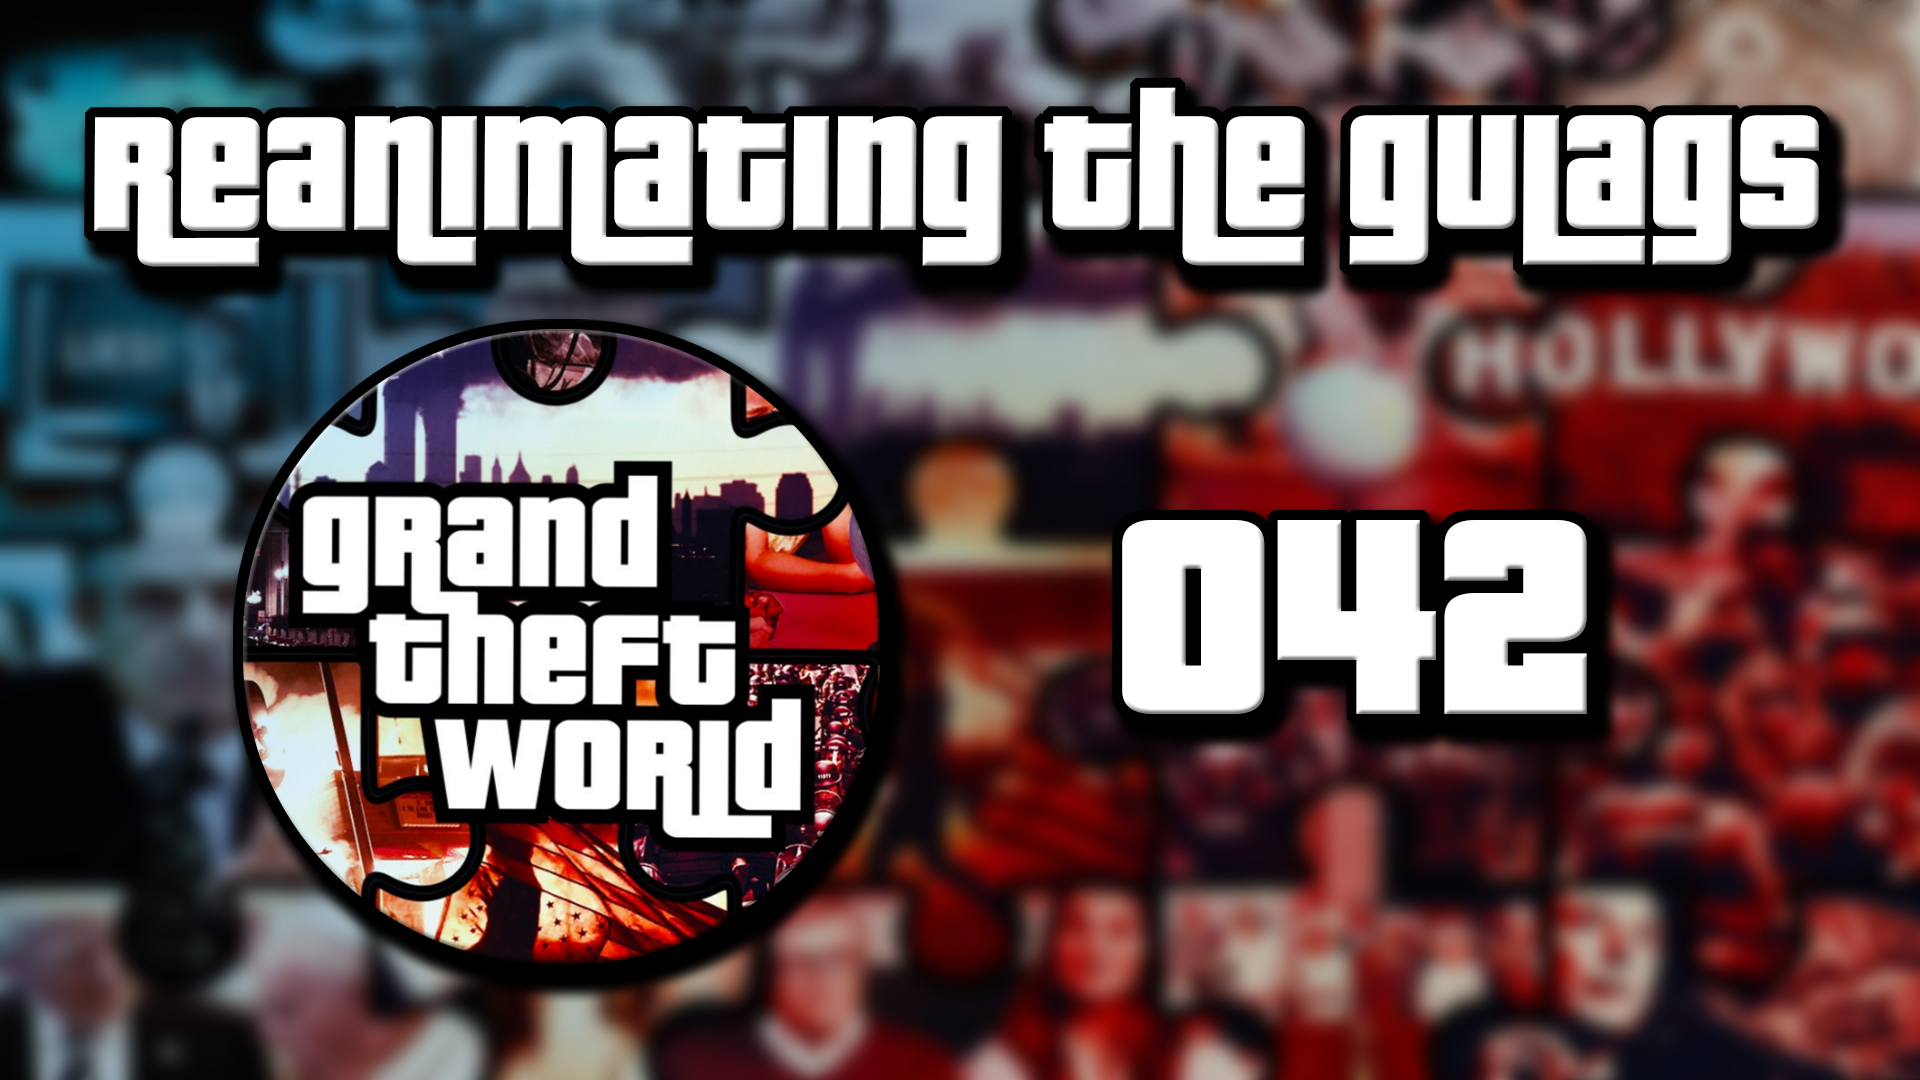 Grand Theft World Podcast 042 | Reanimating the Gulags